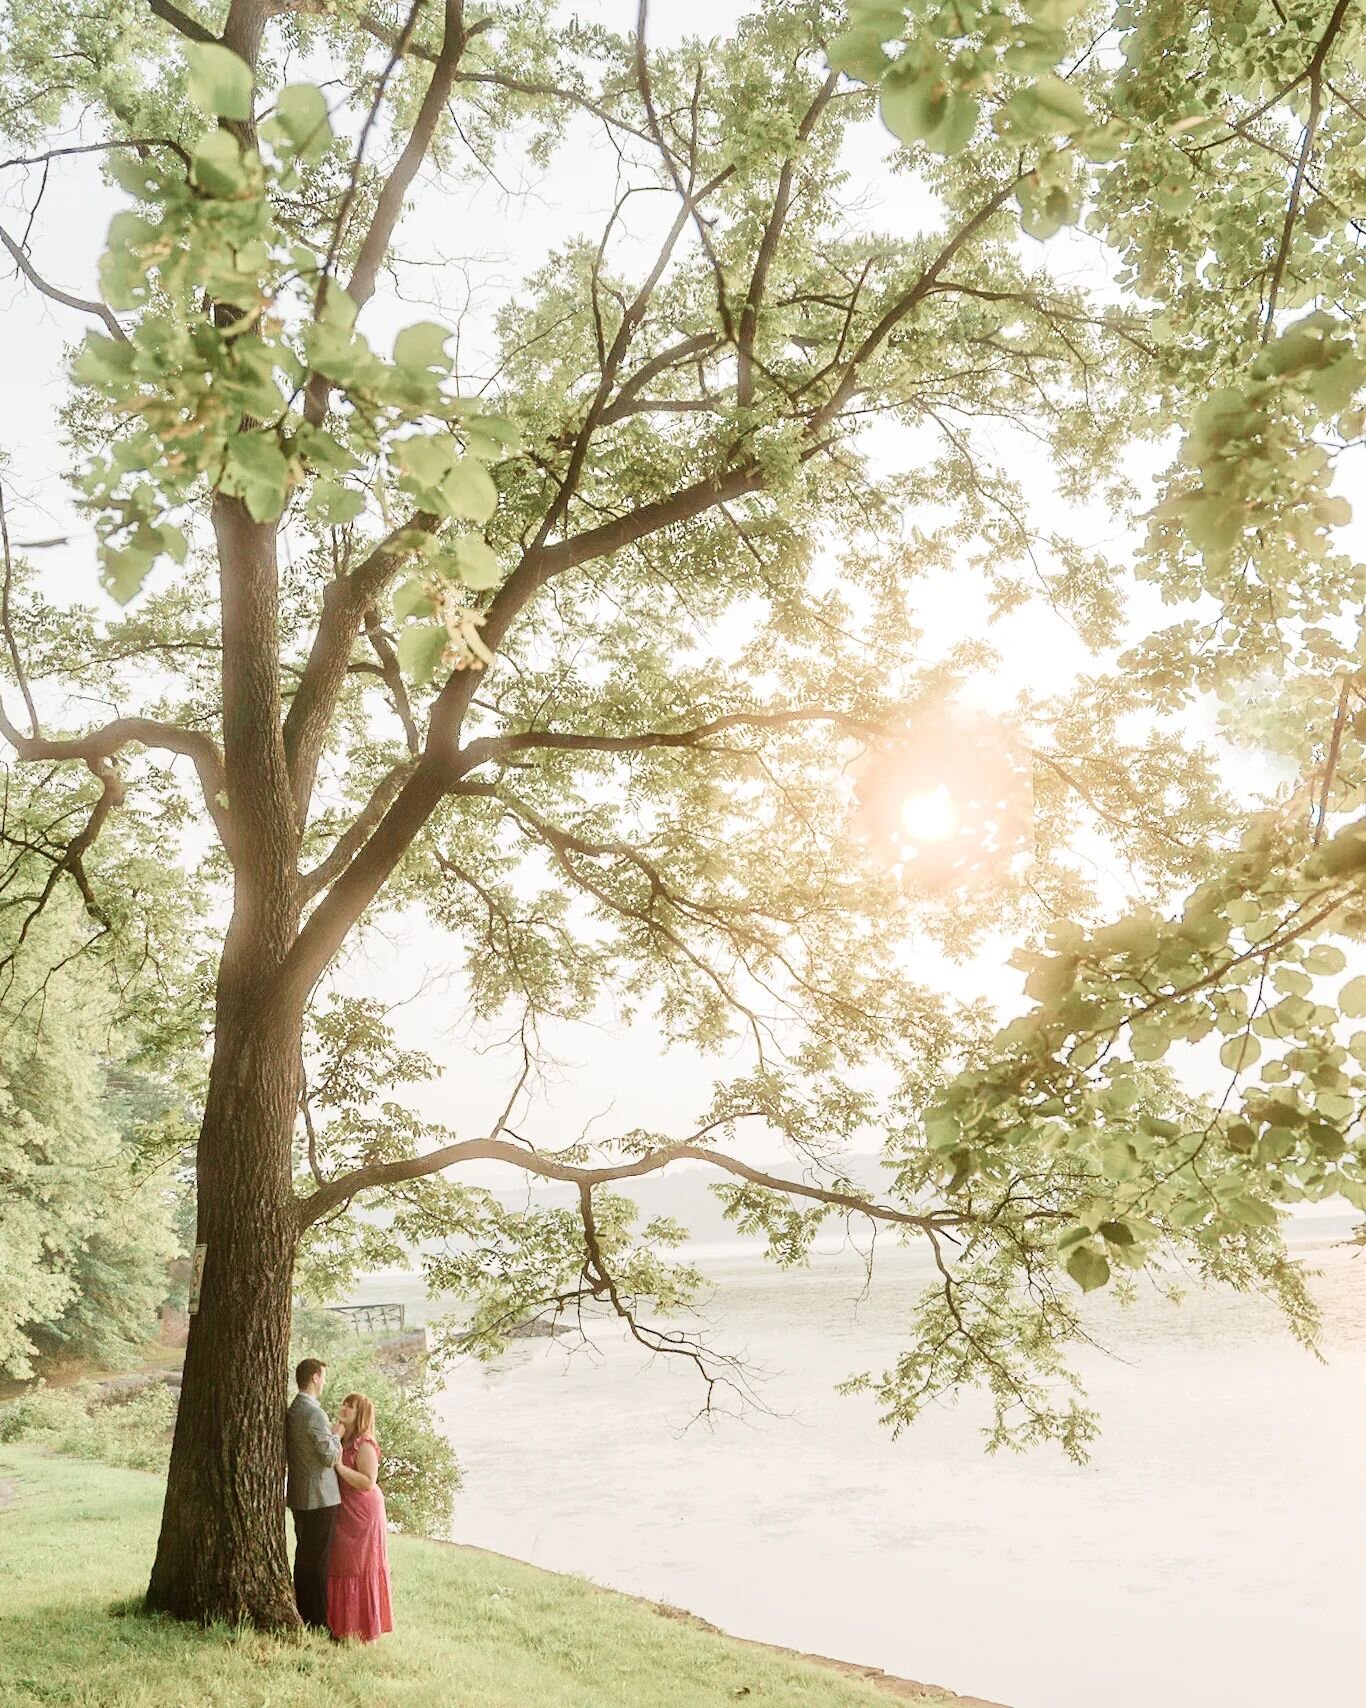 I didn't know it'd be possible to fall in love with a tree, but here we are 😍

#newyorkweddingphotographer #nyweddingphotographer #publishedweddingphotographer #hudsonvalleywedding #hvweddingphotographer #luxuryweddingphotographer #ctweddingphotogra